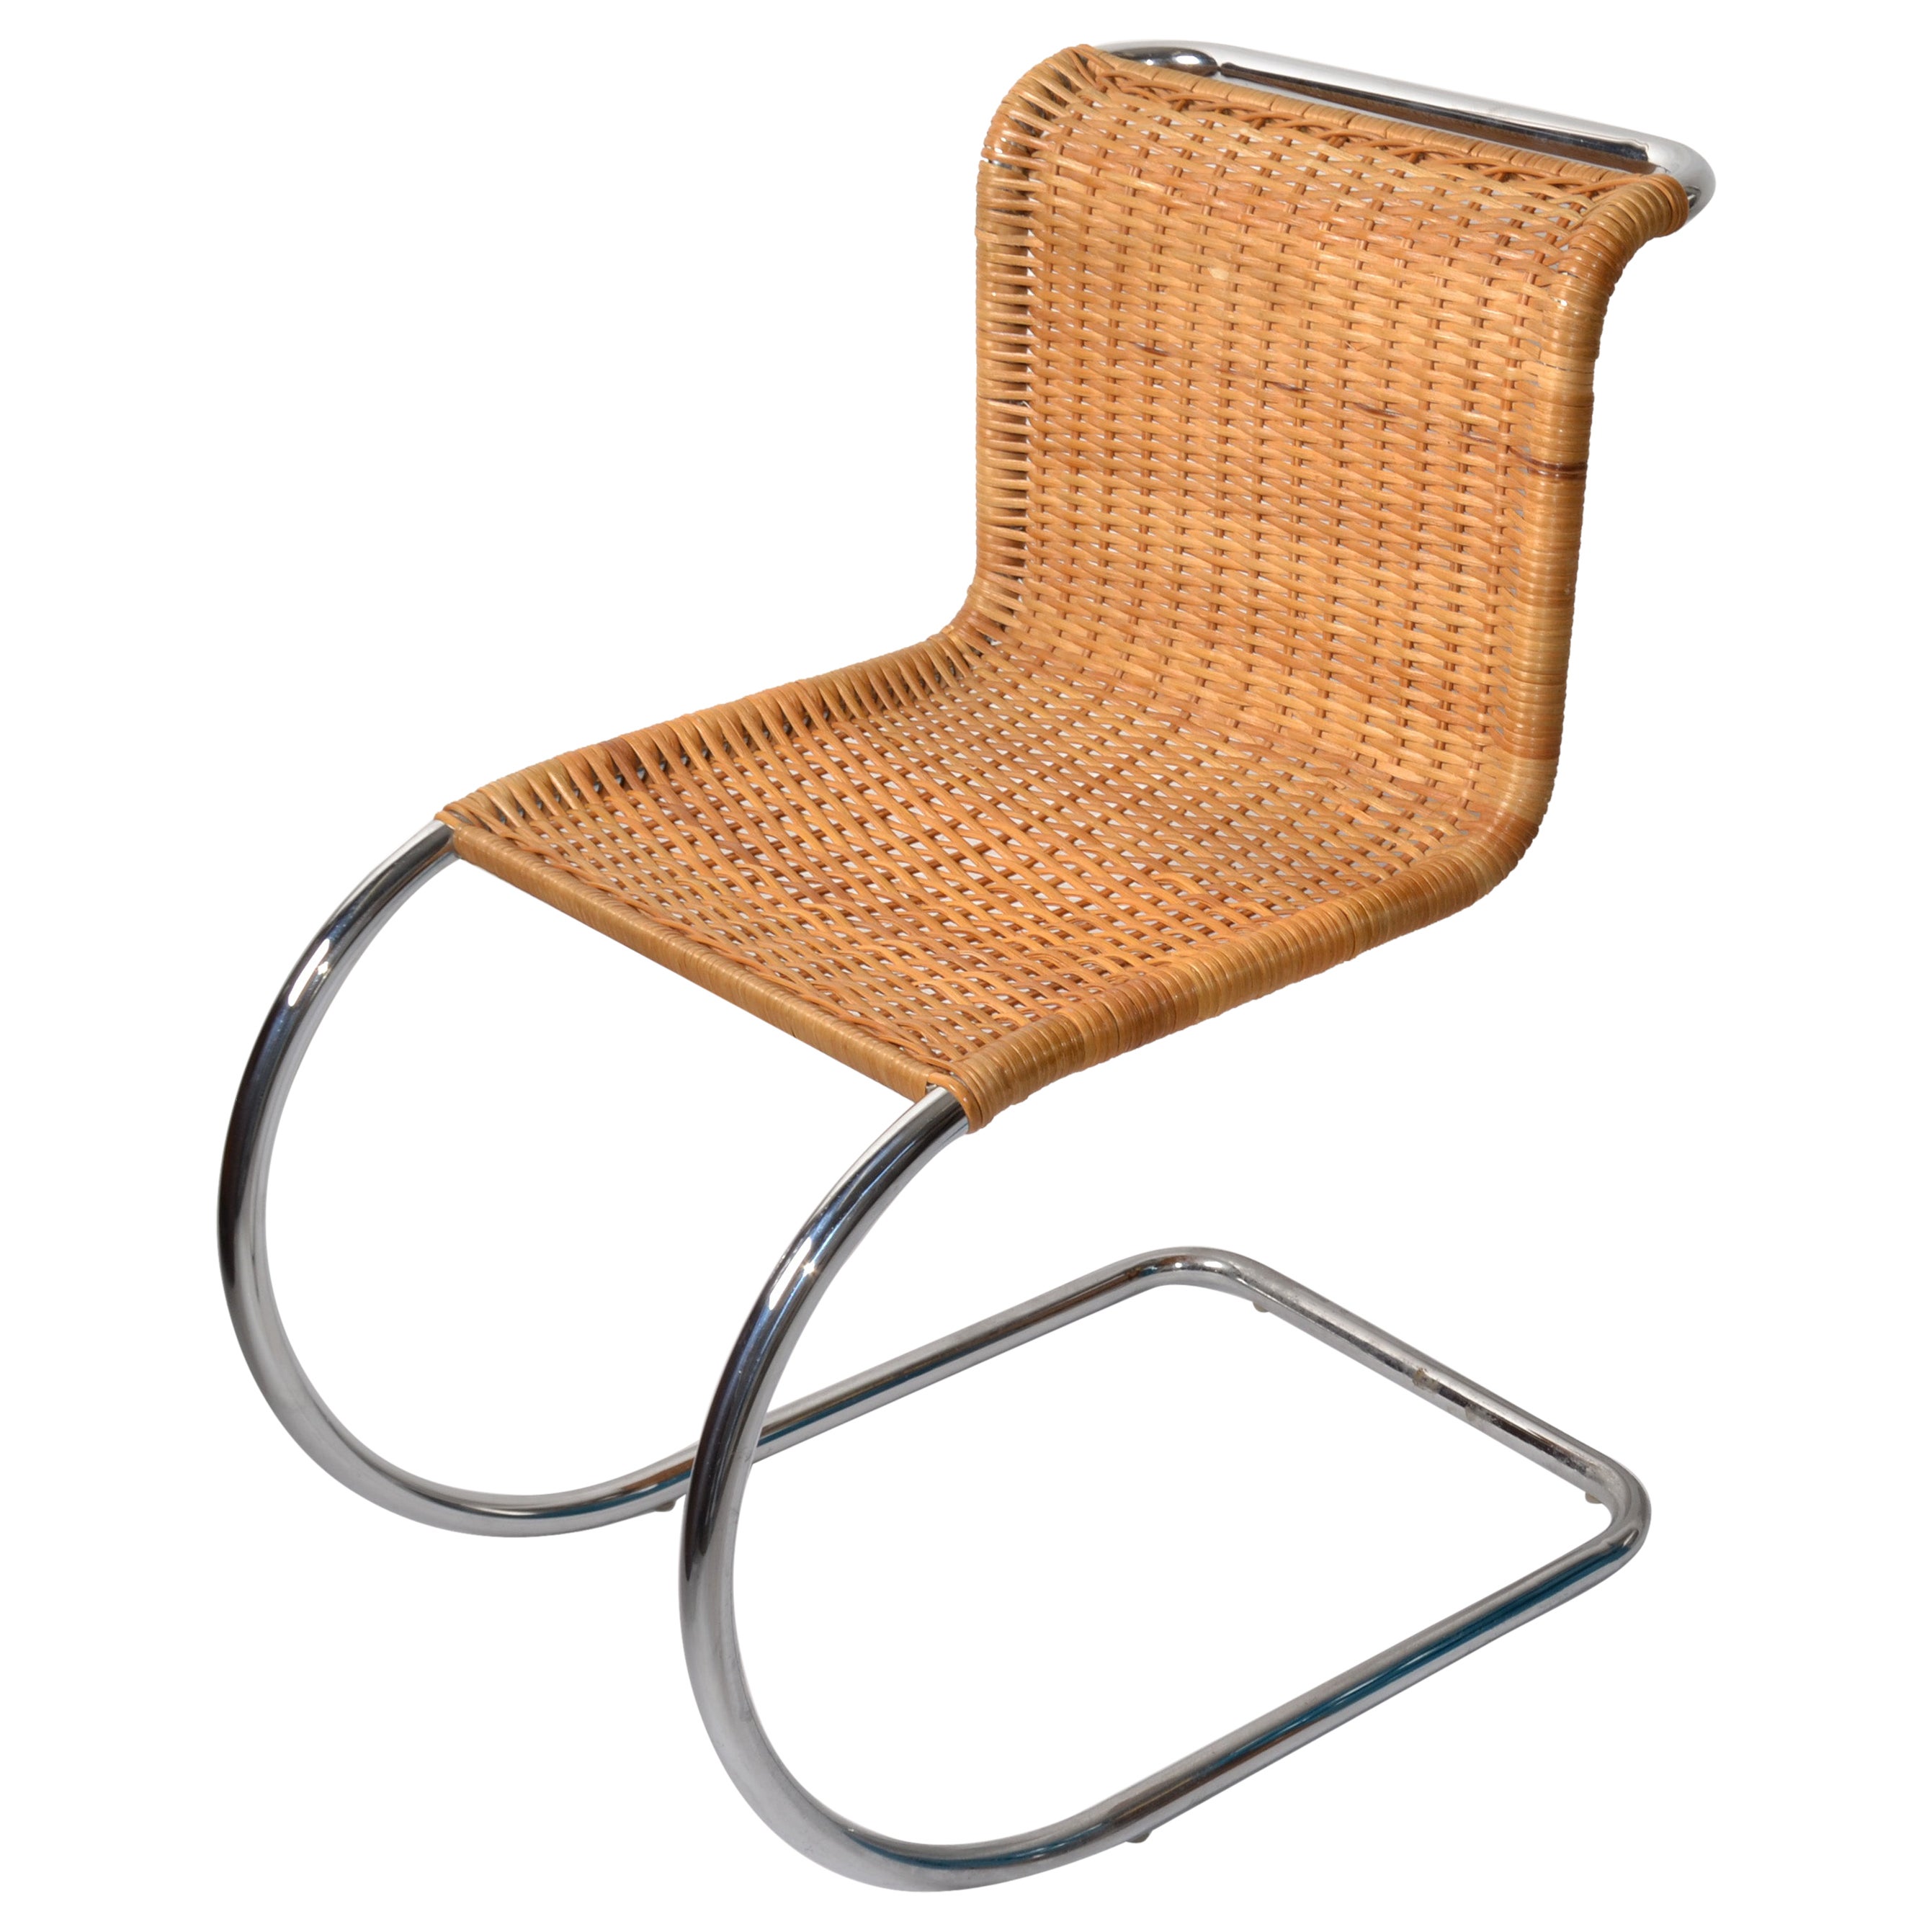 Tubular Ludwig Mies van der Rohe Attributed Mr Chair Armless Woven Cane Seat 70s